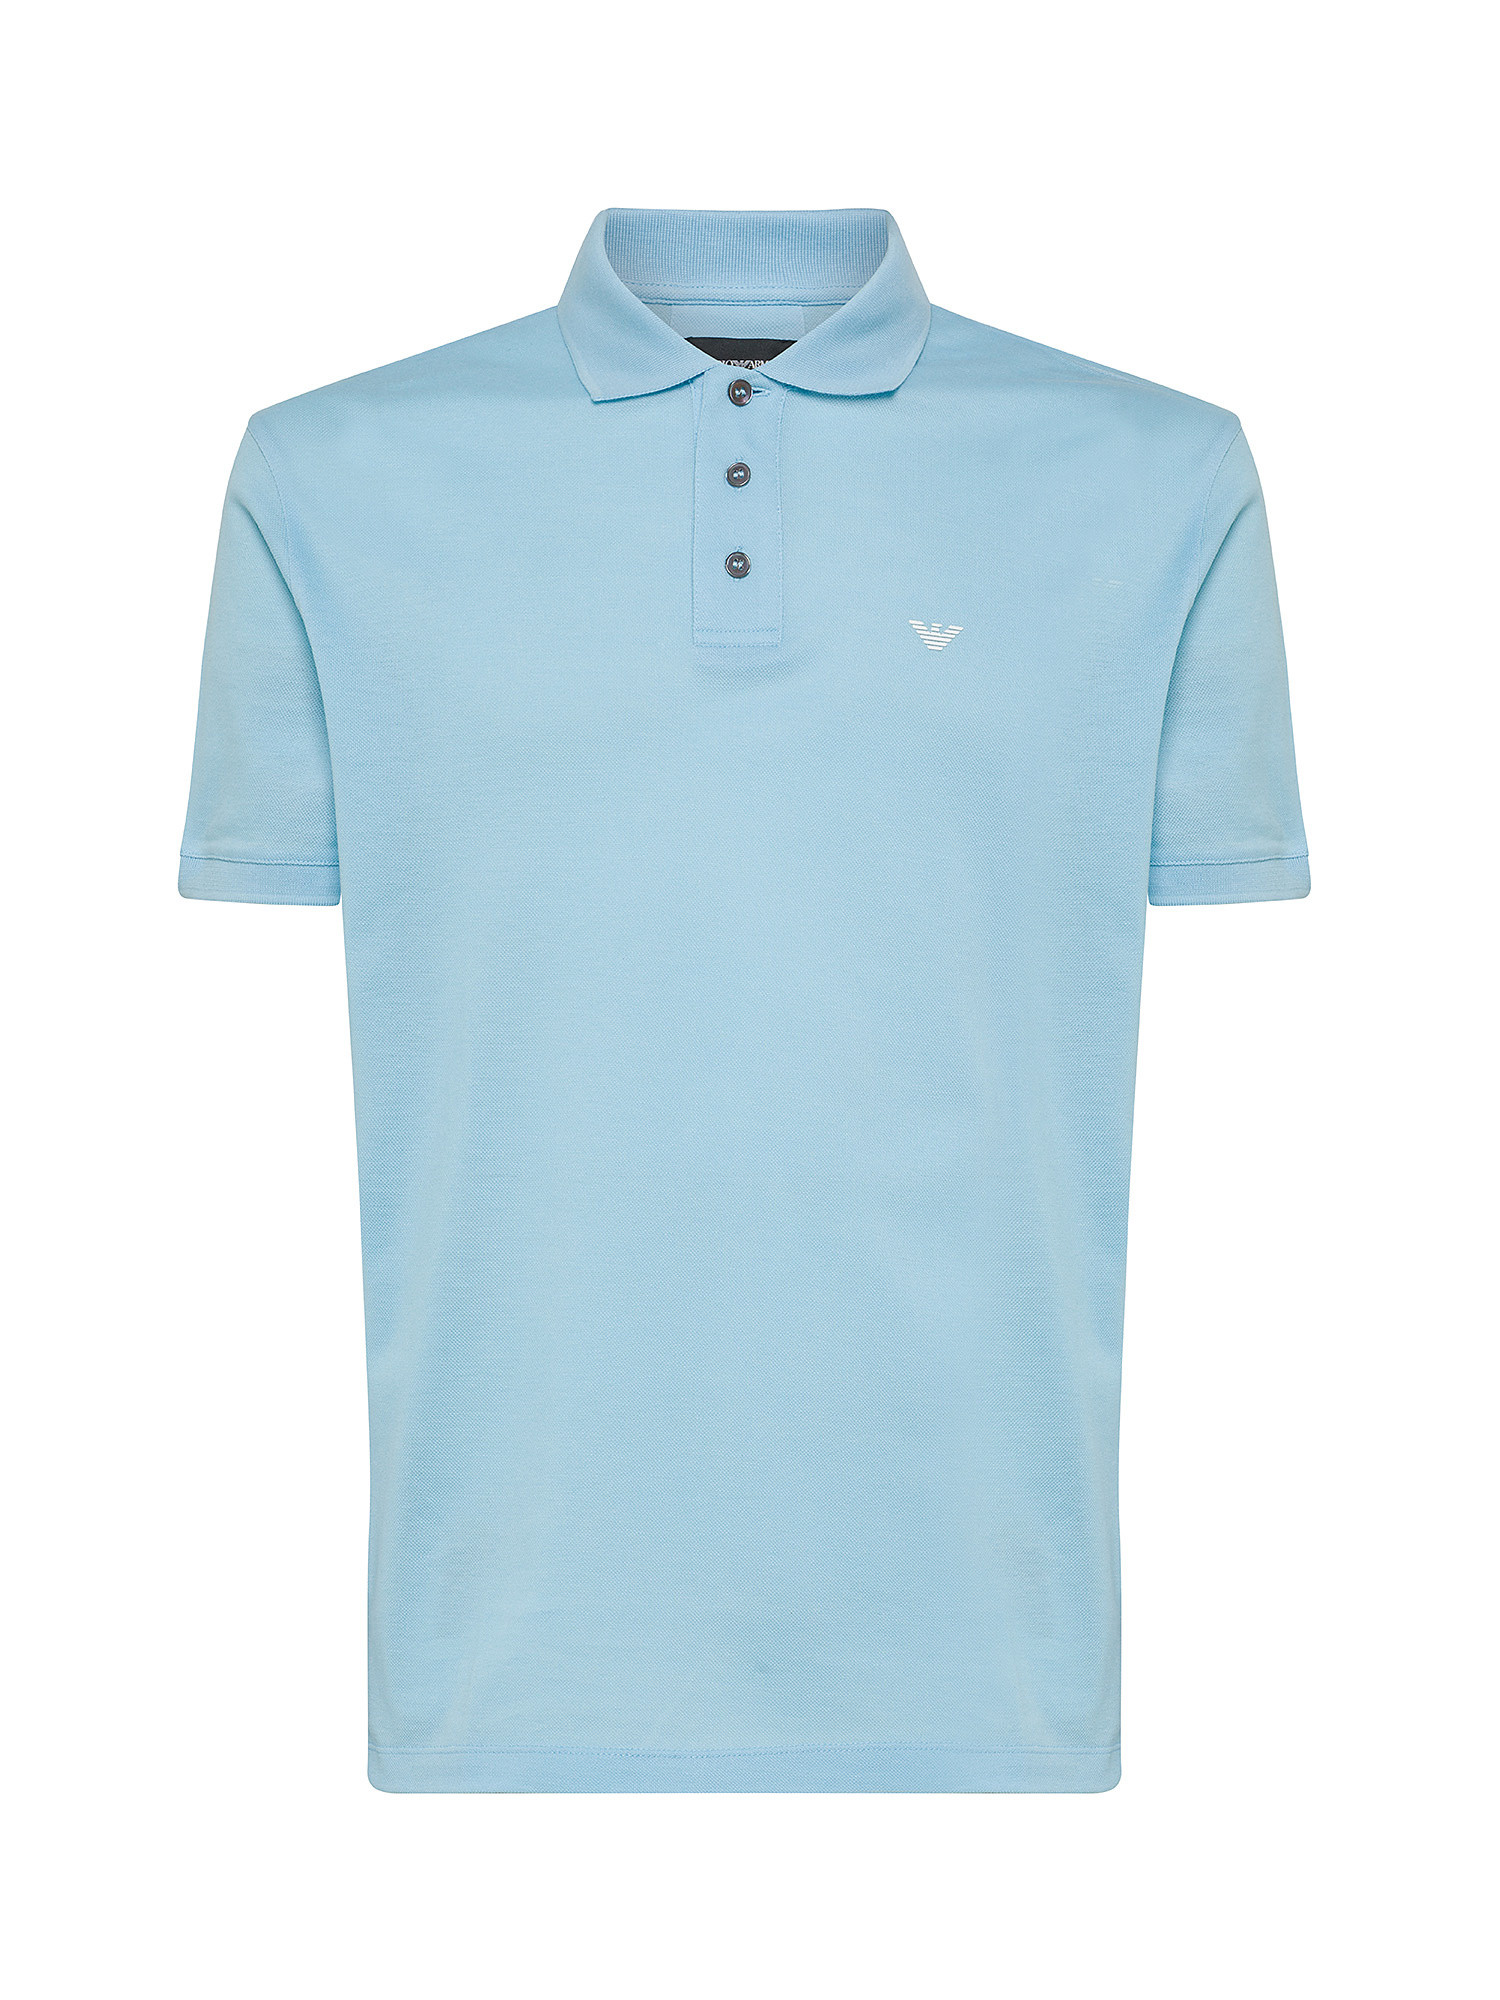 Emporio Armani - Cotton polo shirt with eagle logo embroidery, Light Blue, large image number 0